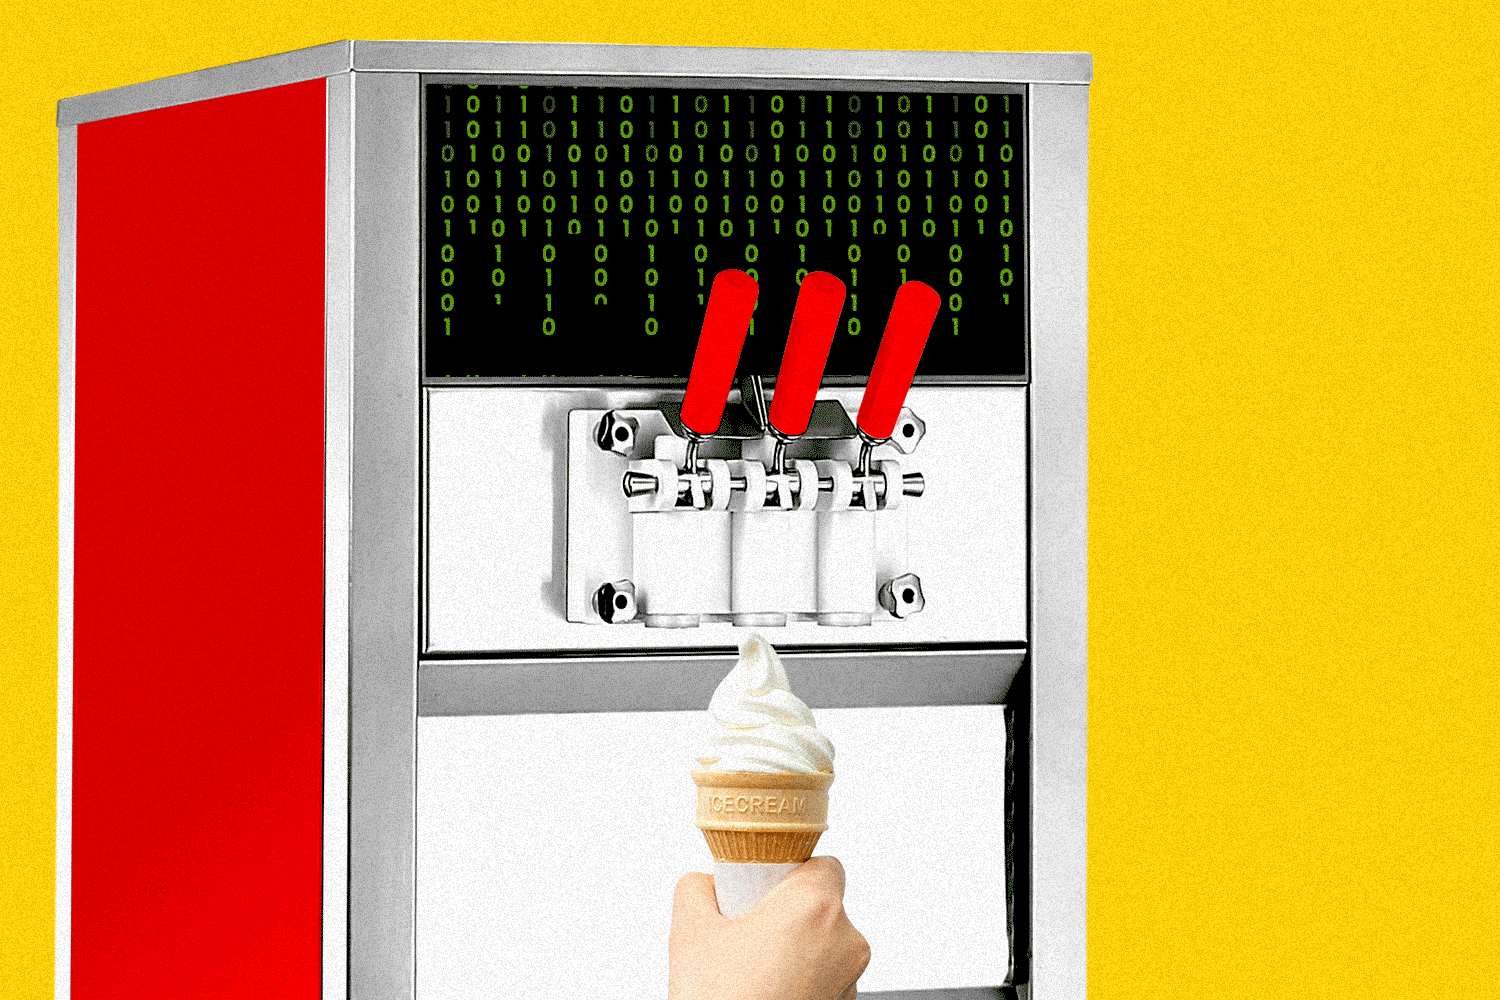 An ice cream machine with scrolling code